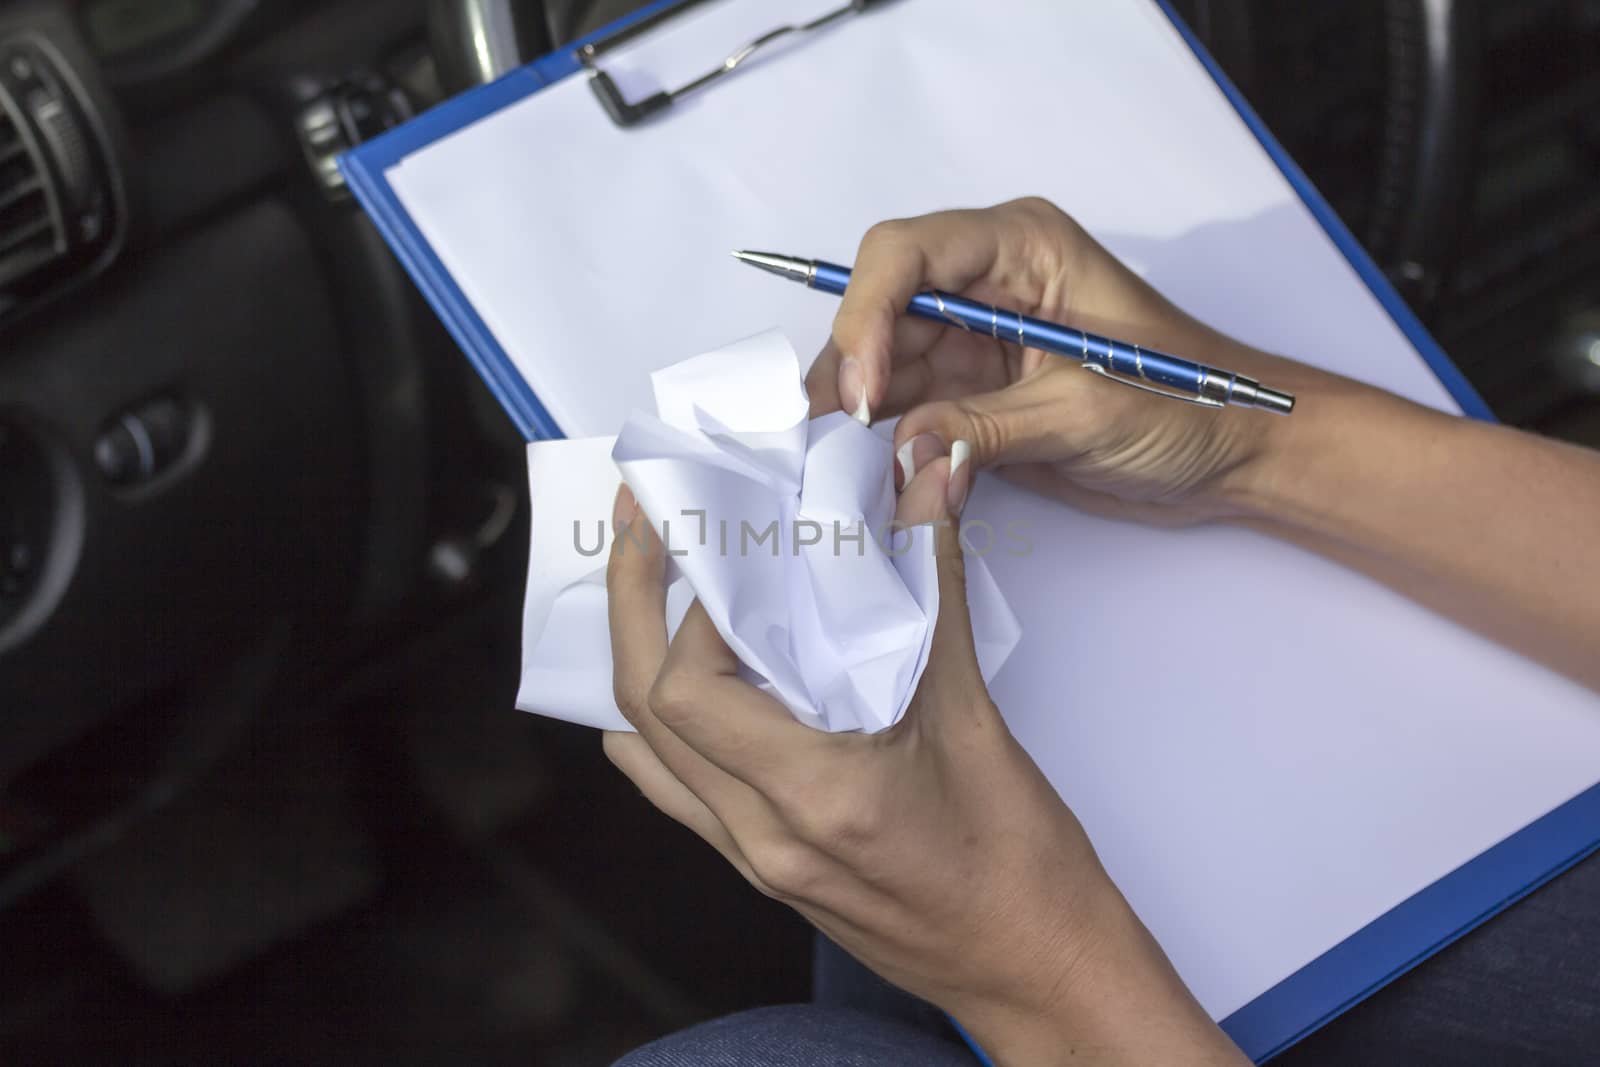 Girl in car holds clip board, pen and paper jammed